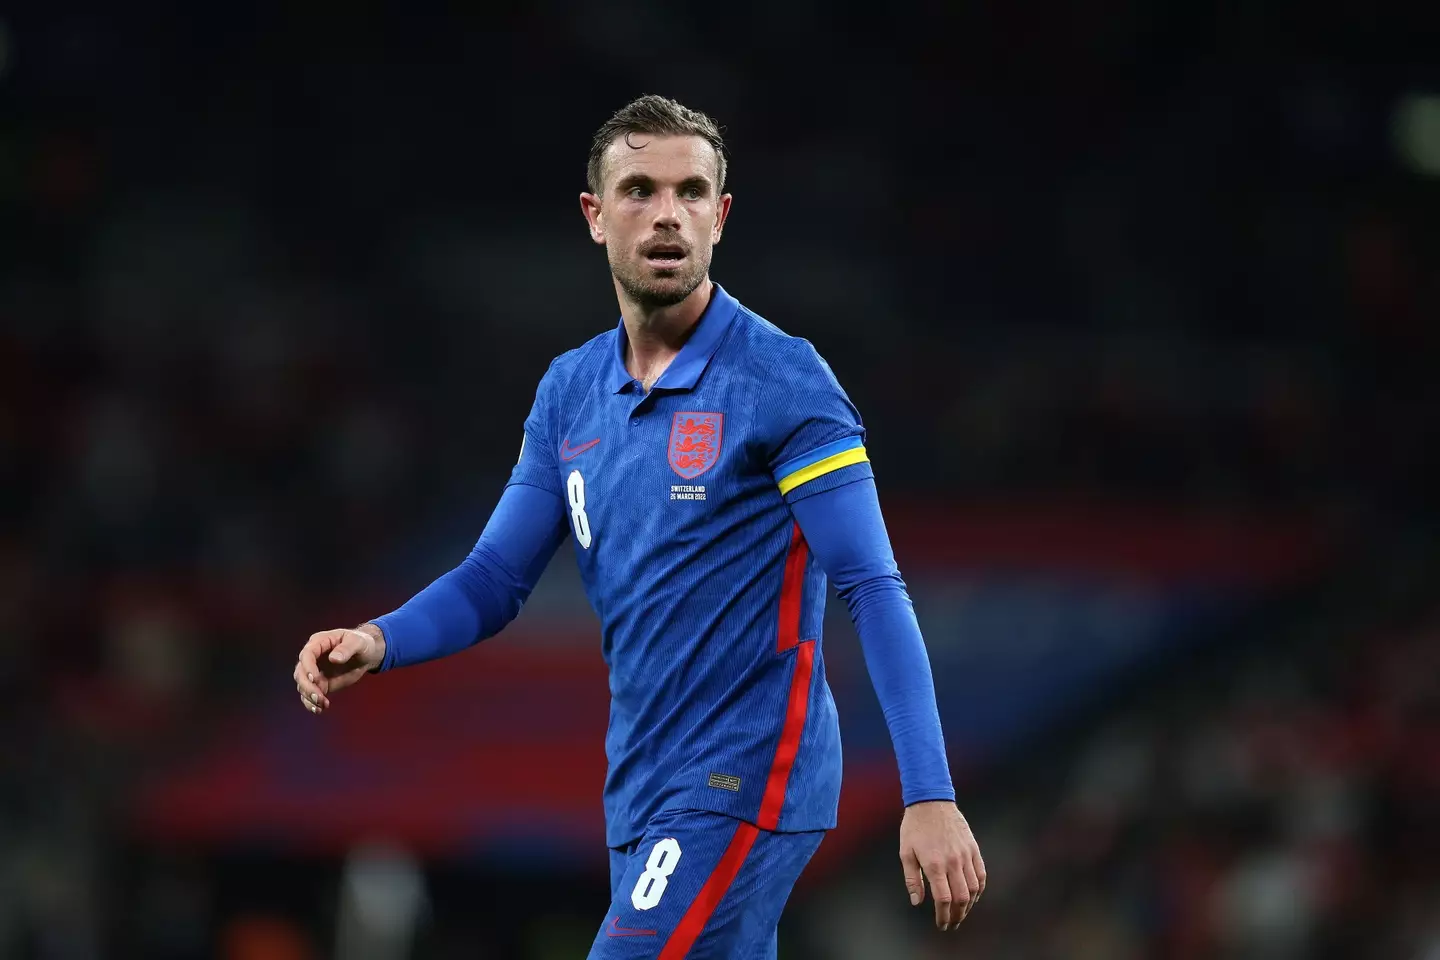 Henderson believes England have improved since the 2018 World Cup in Russia (Image: PA)